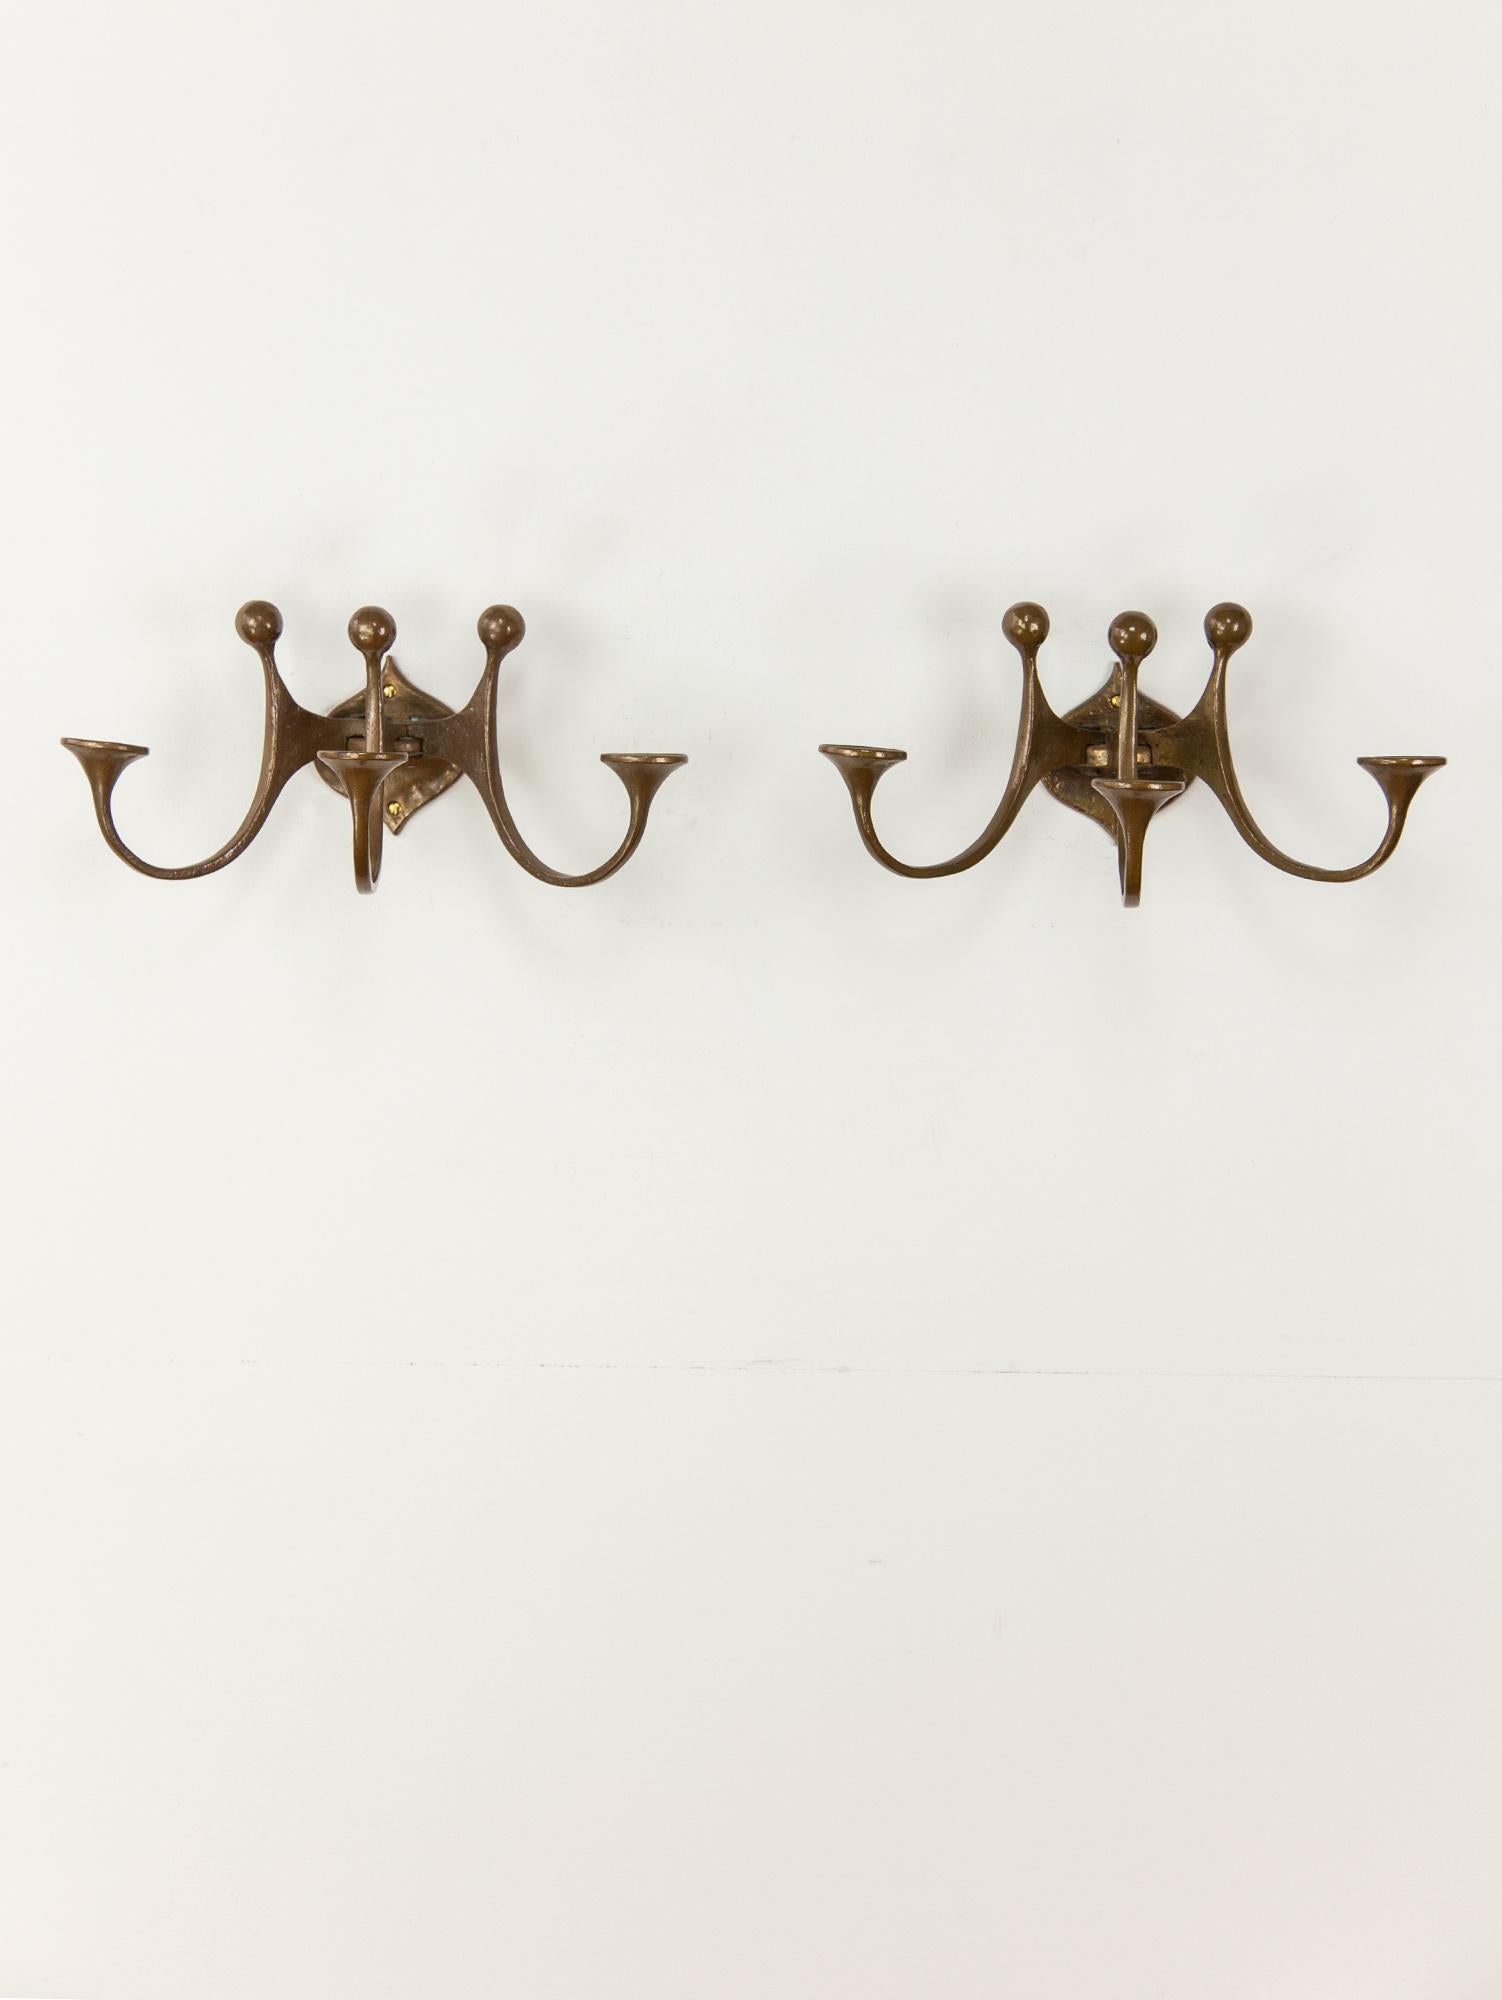 Brutalist bronze sconces by Michael Harjes. The handmade sculptural sconces have a beautiful textural surface. Large in size the wall lights hold three candles each with a decorative arch finished with a playful spherical cap. Made in Germany, circa